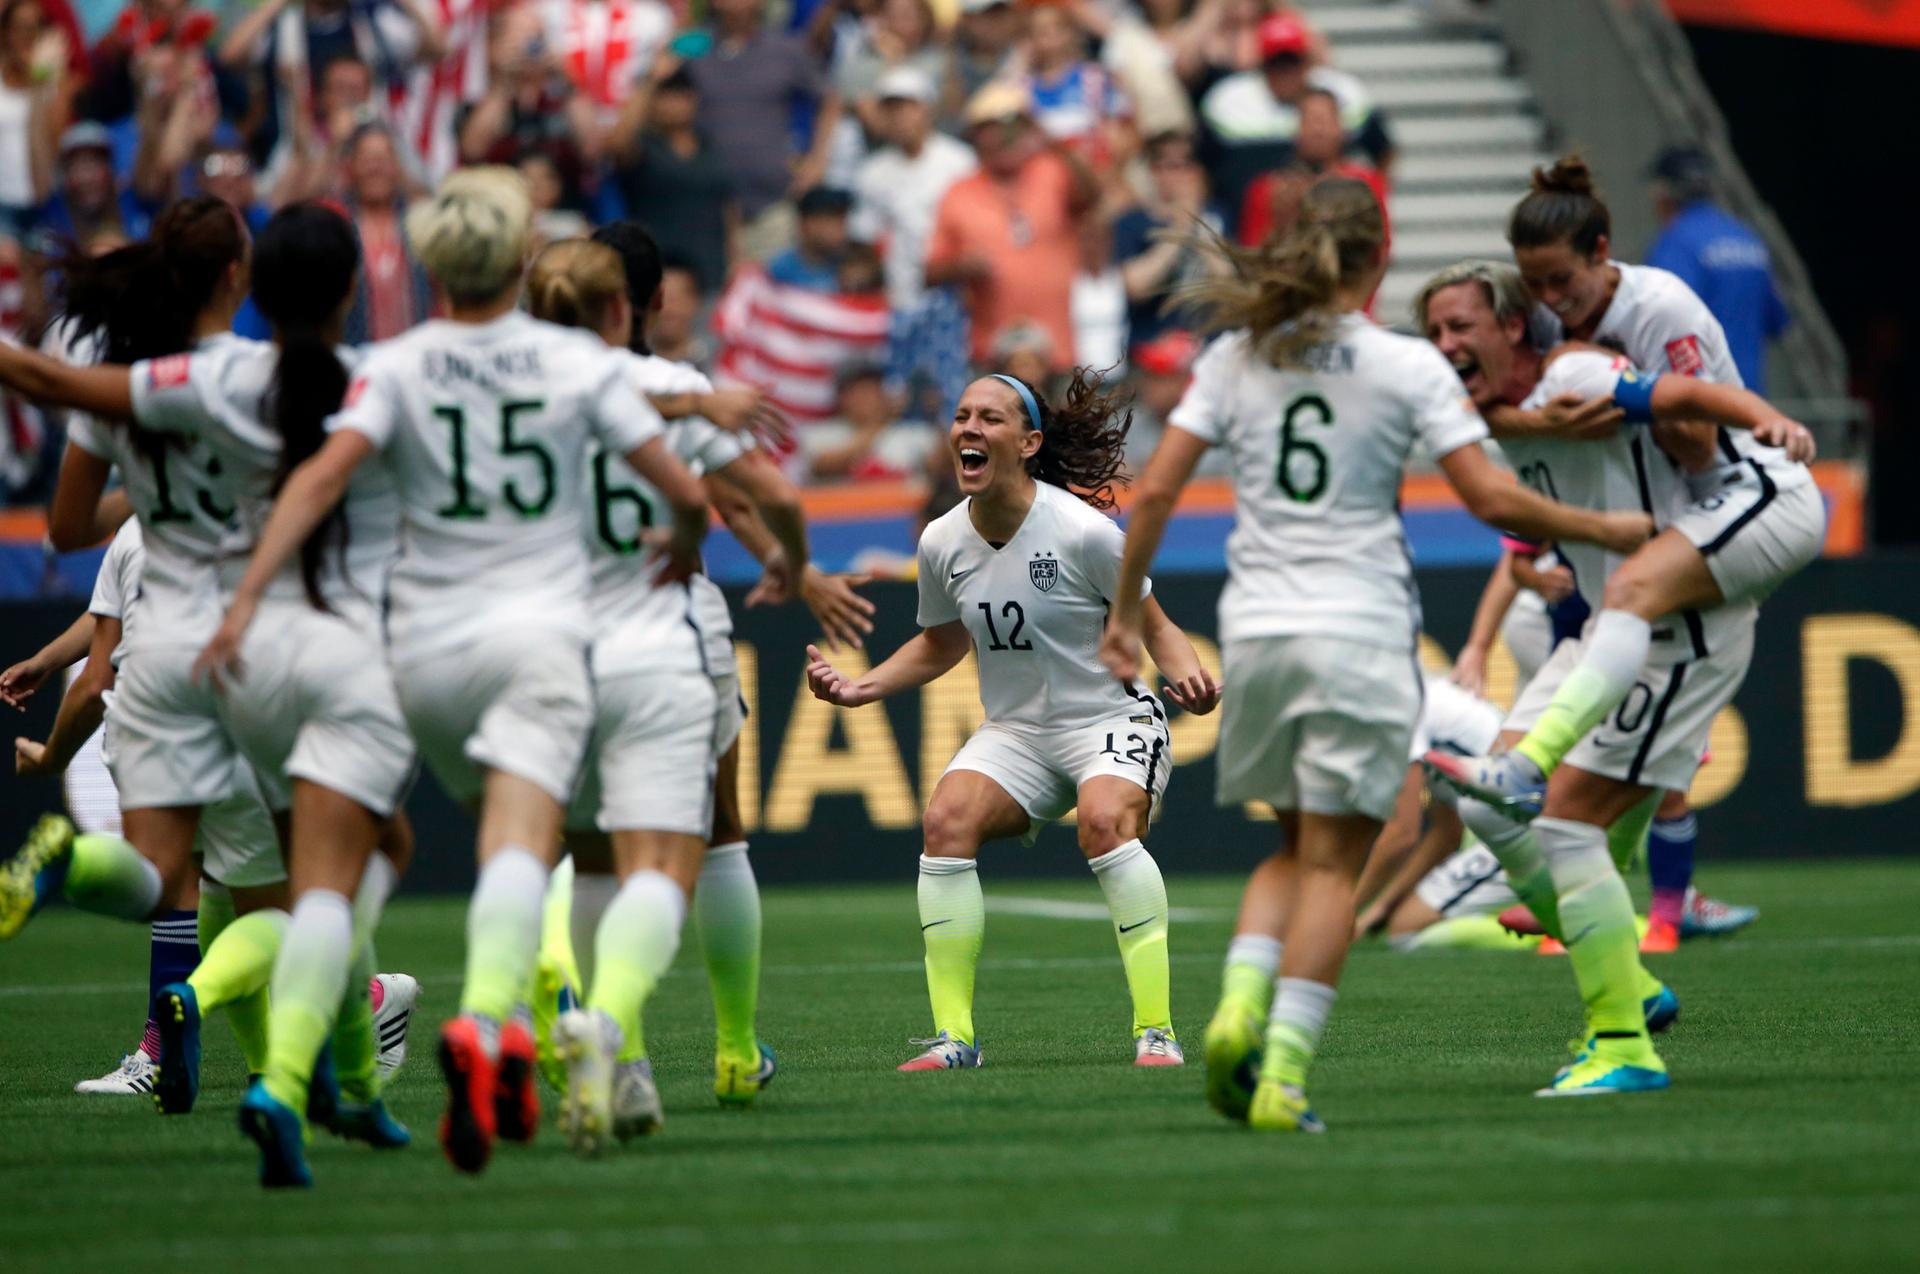 The US women's national team celebrates after winning the World Cup